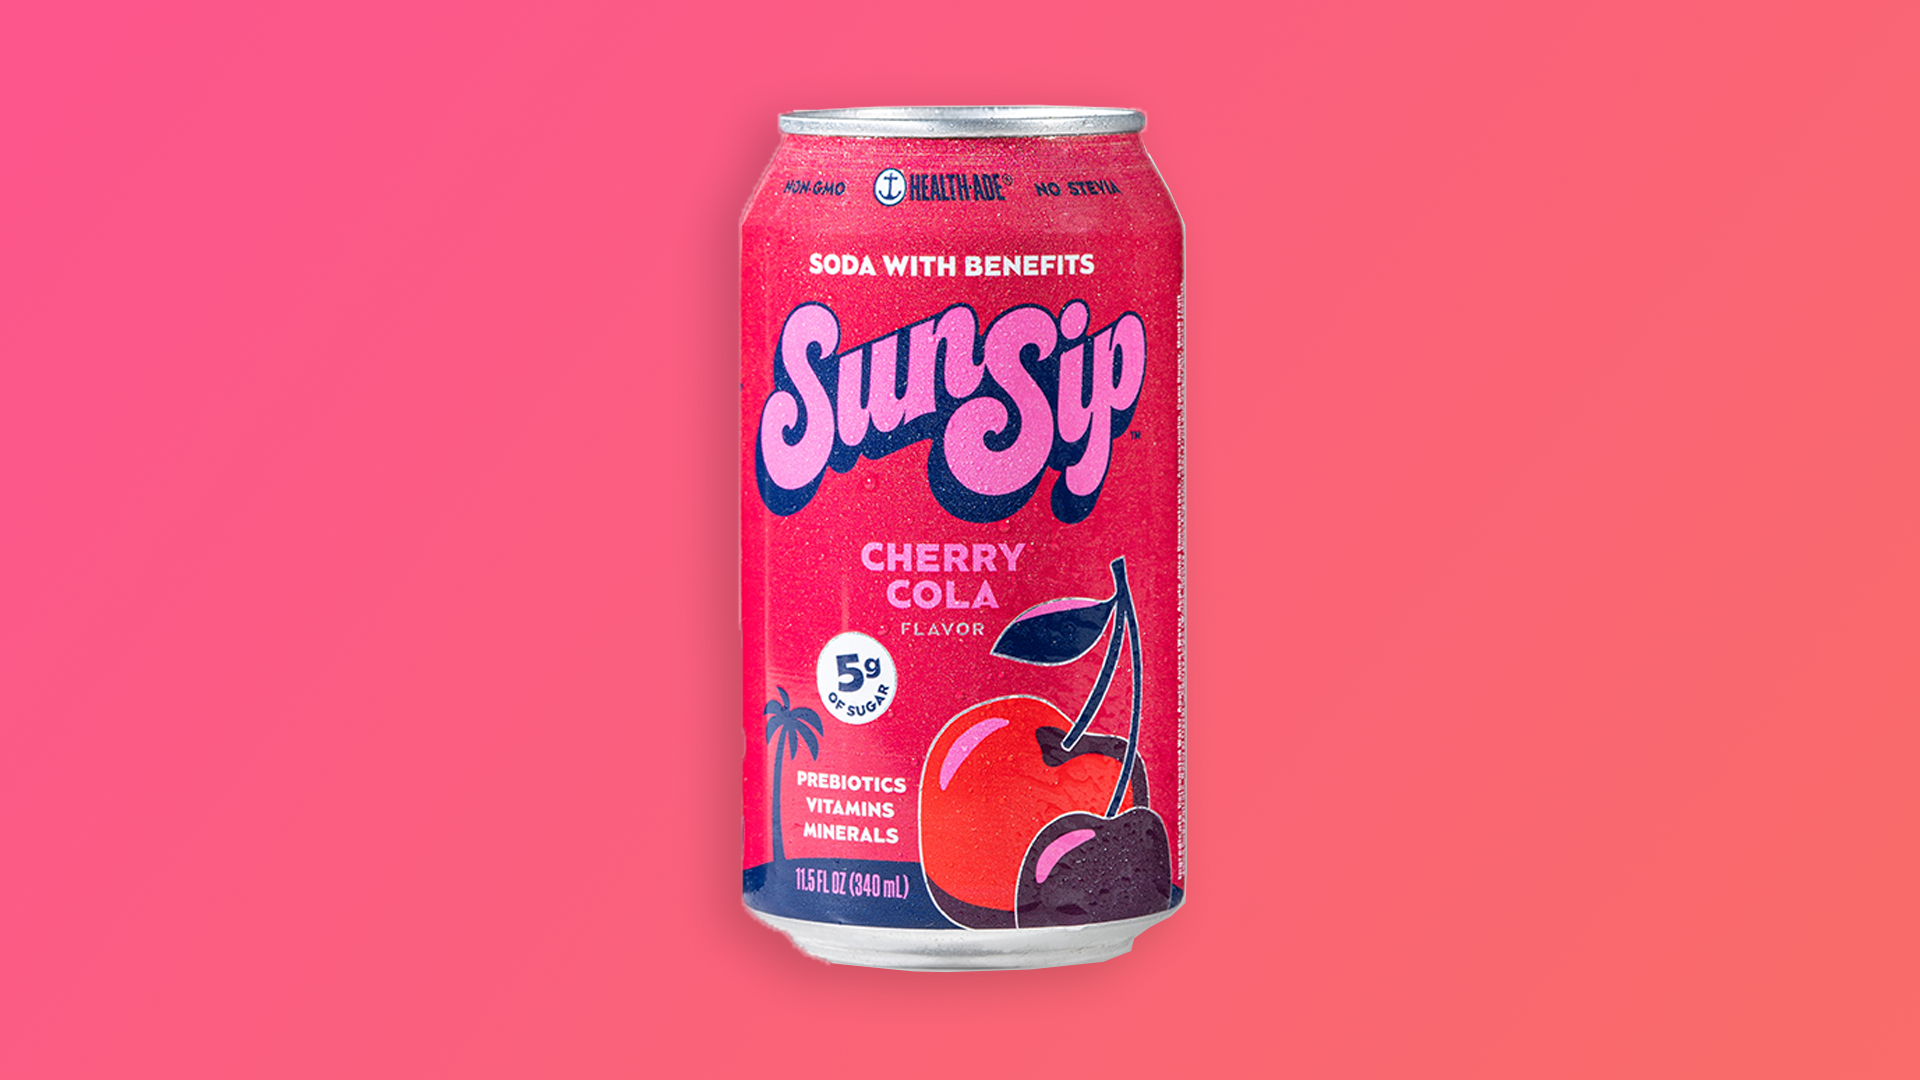 Health-Ade Launches SunSip, a New Line Better-For-You Sodas